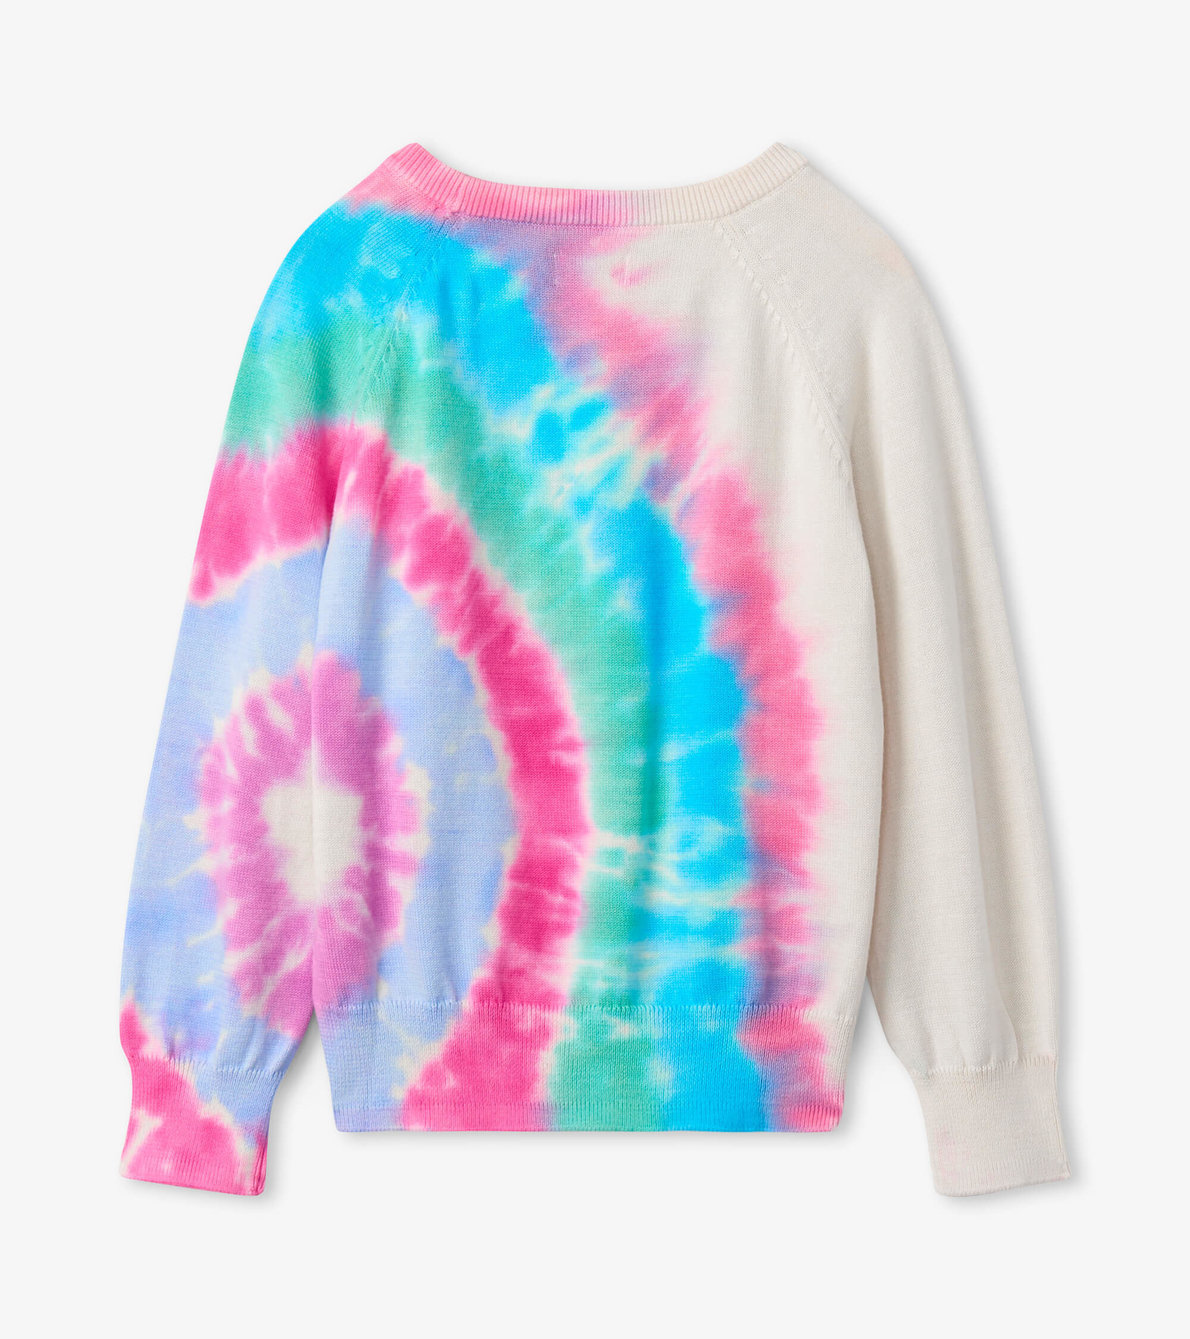 View larger image of Tie Dye Burst Pullover